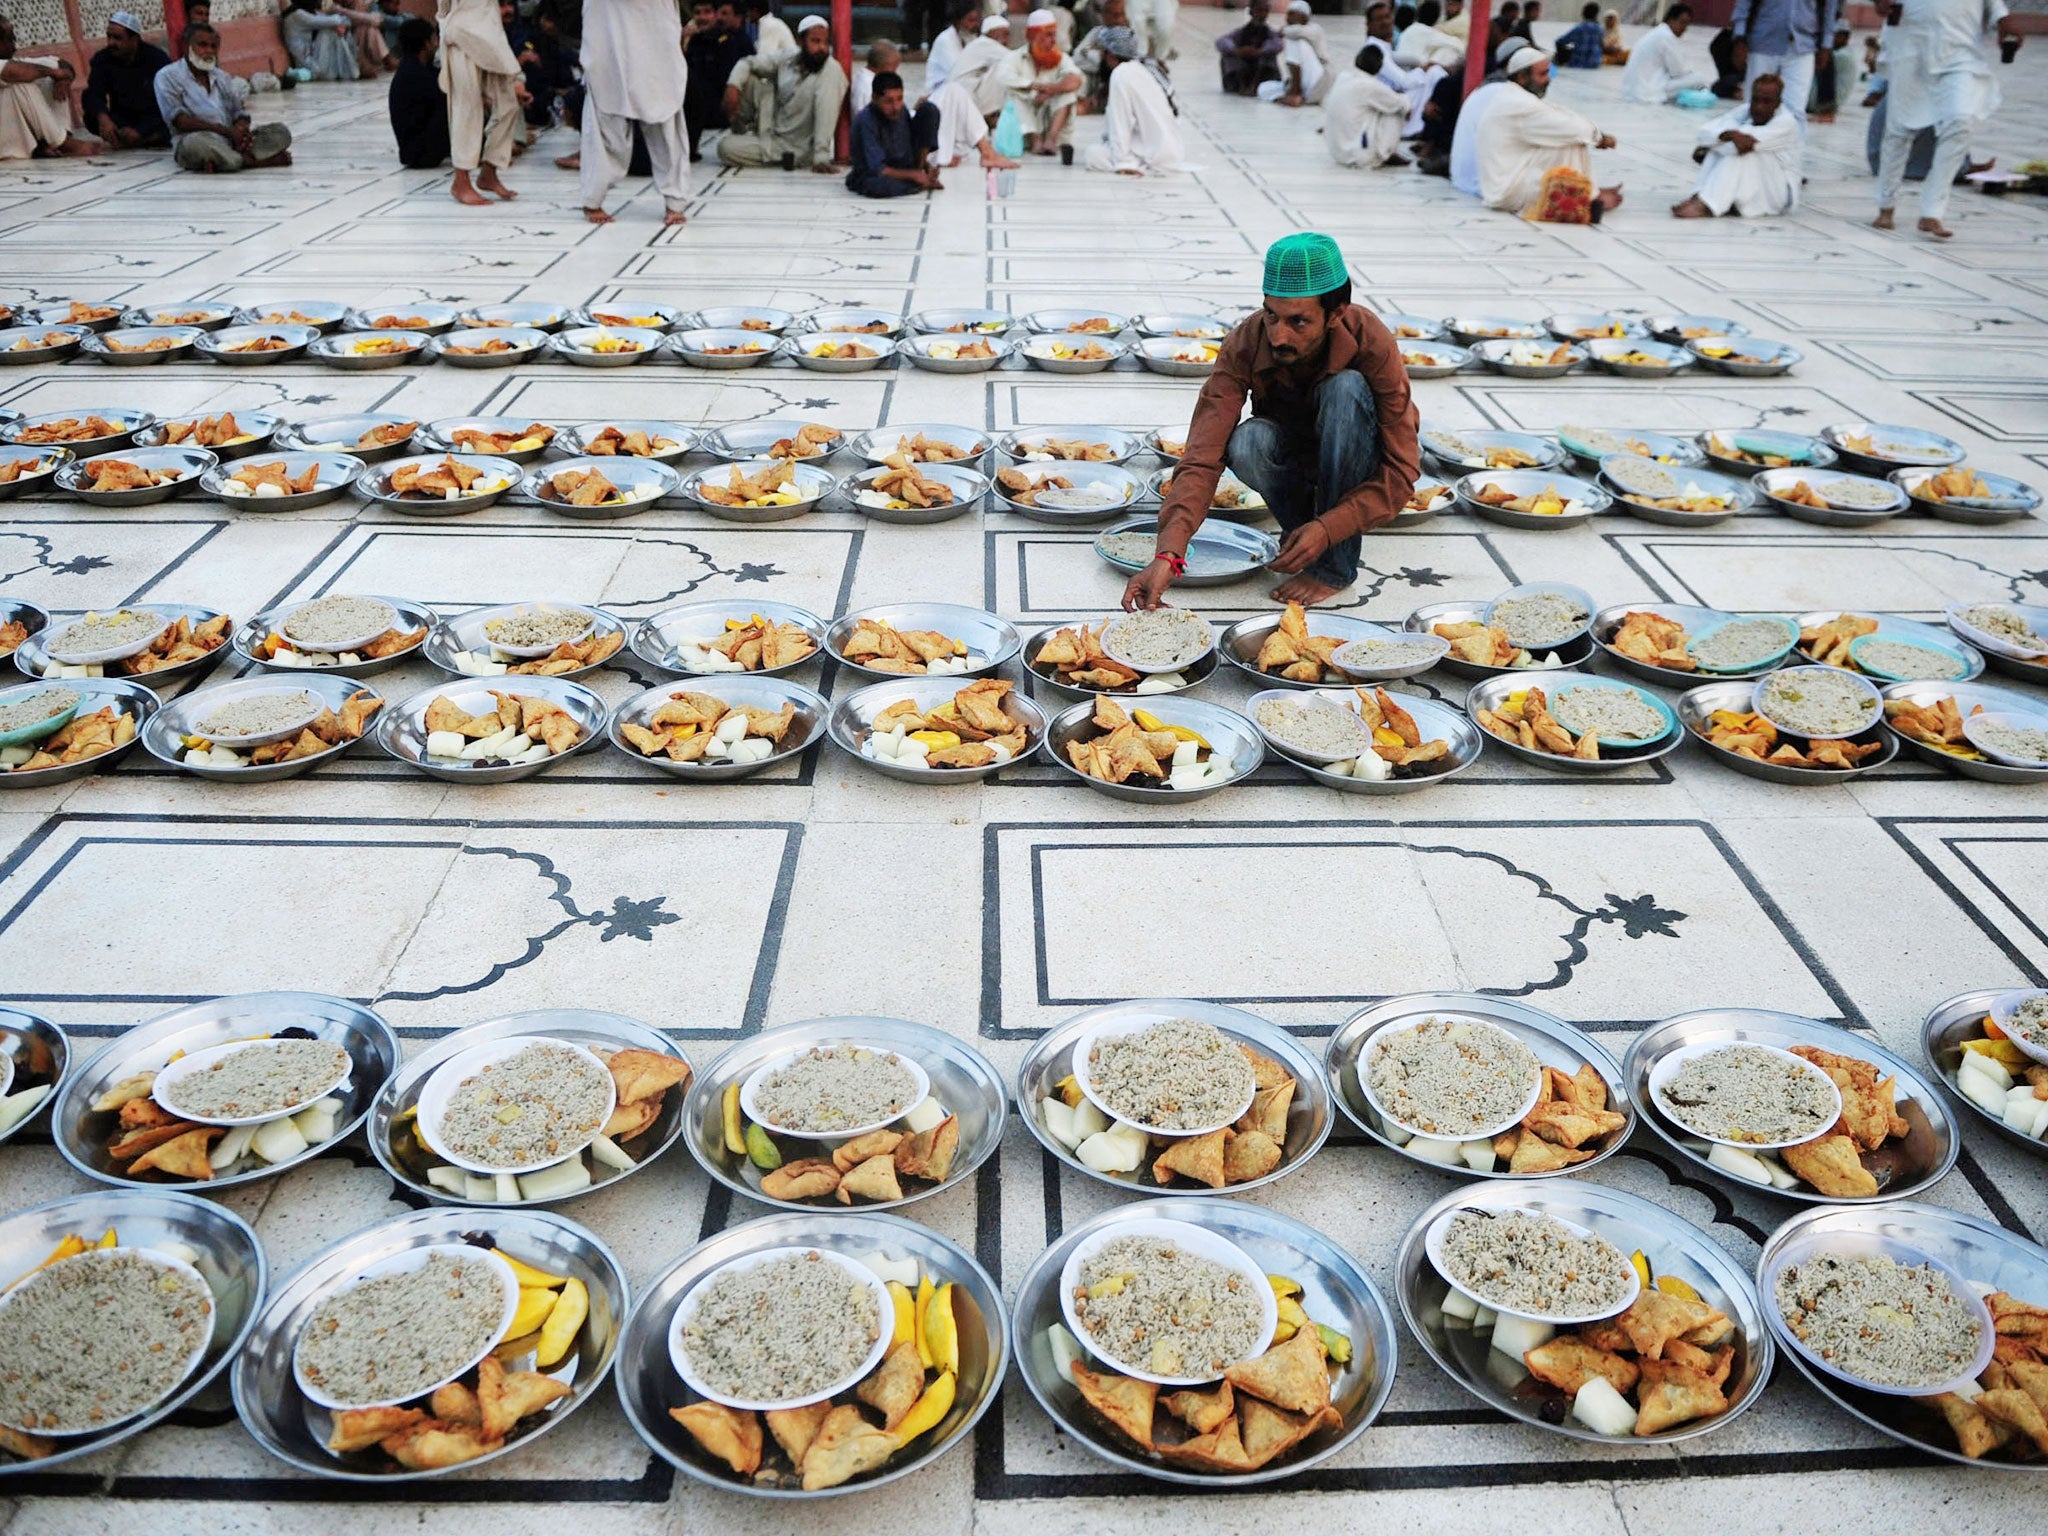 A Pakistani Muslim man arranges Iftar food for Muslim devotees before they break their fast during the holy fasting month of Ramadan in Karachi